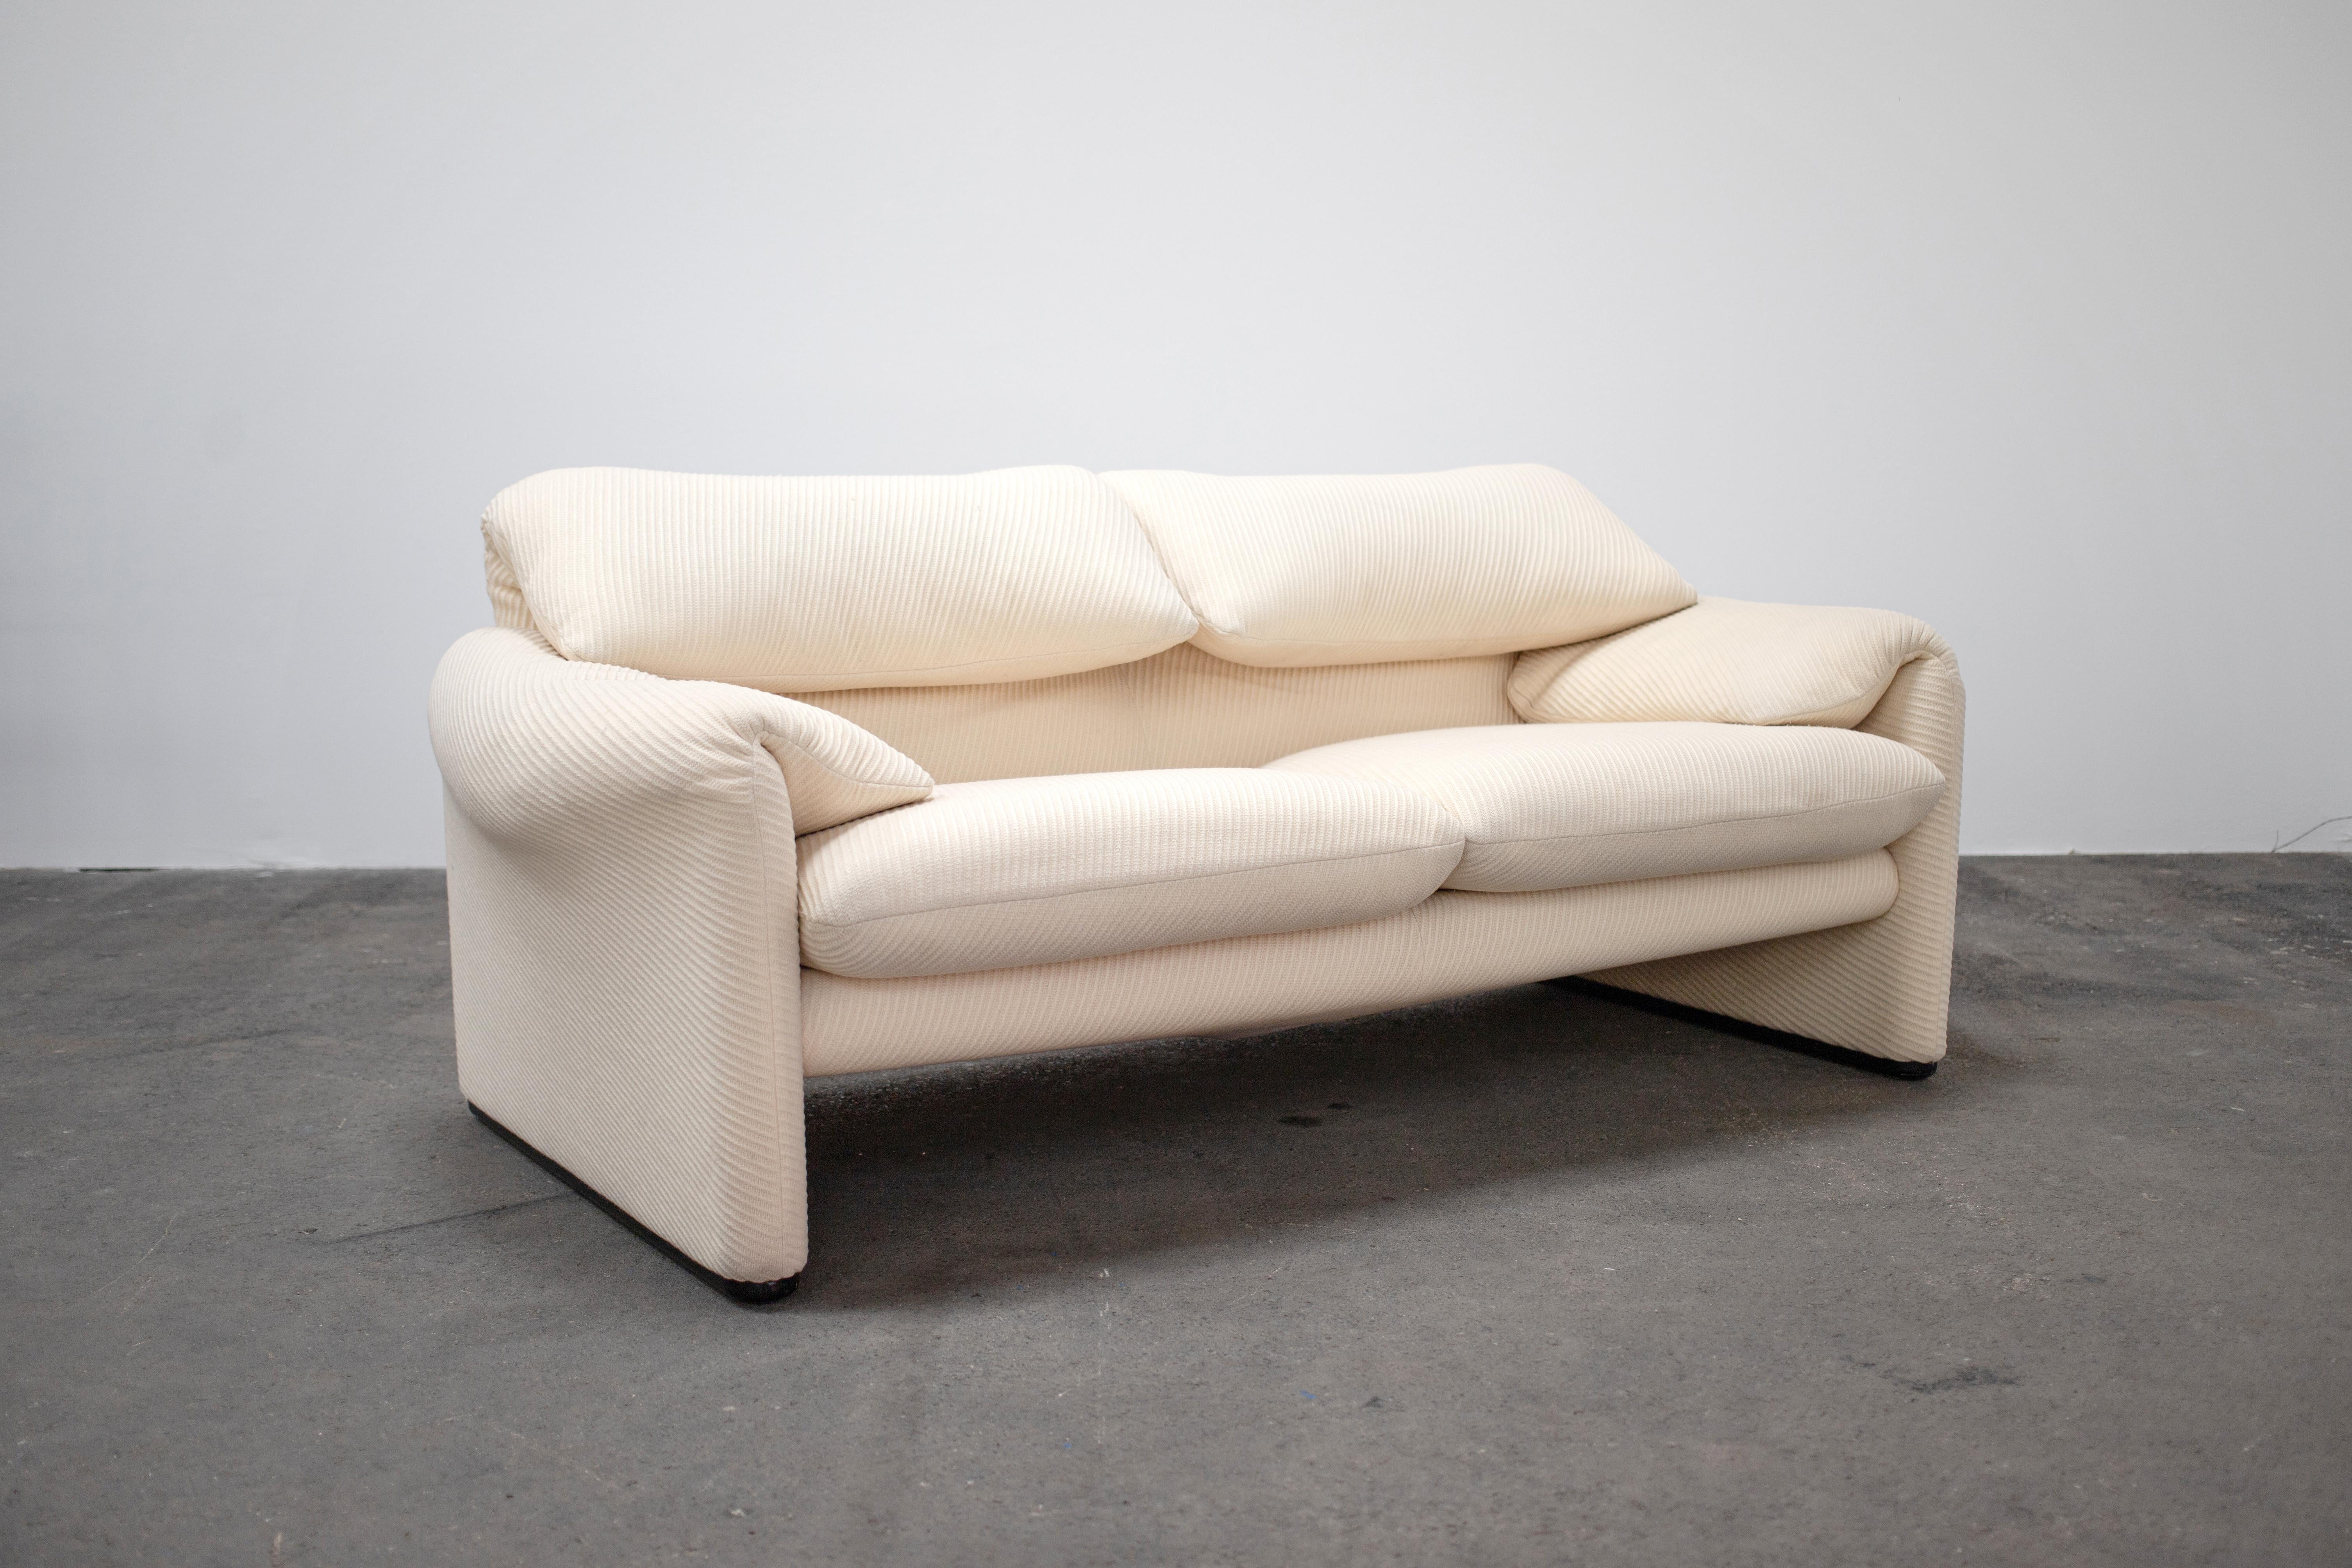 Wool 1970s 2-Seater Maralunga Sofa by Vico Magistretti for Cassina For Sale